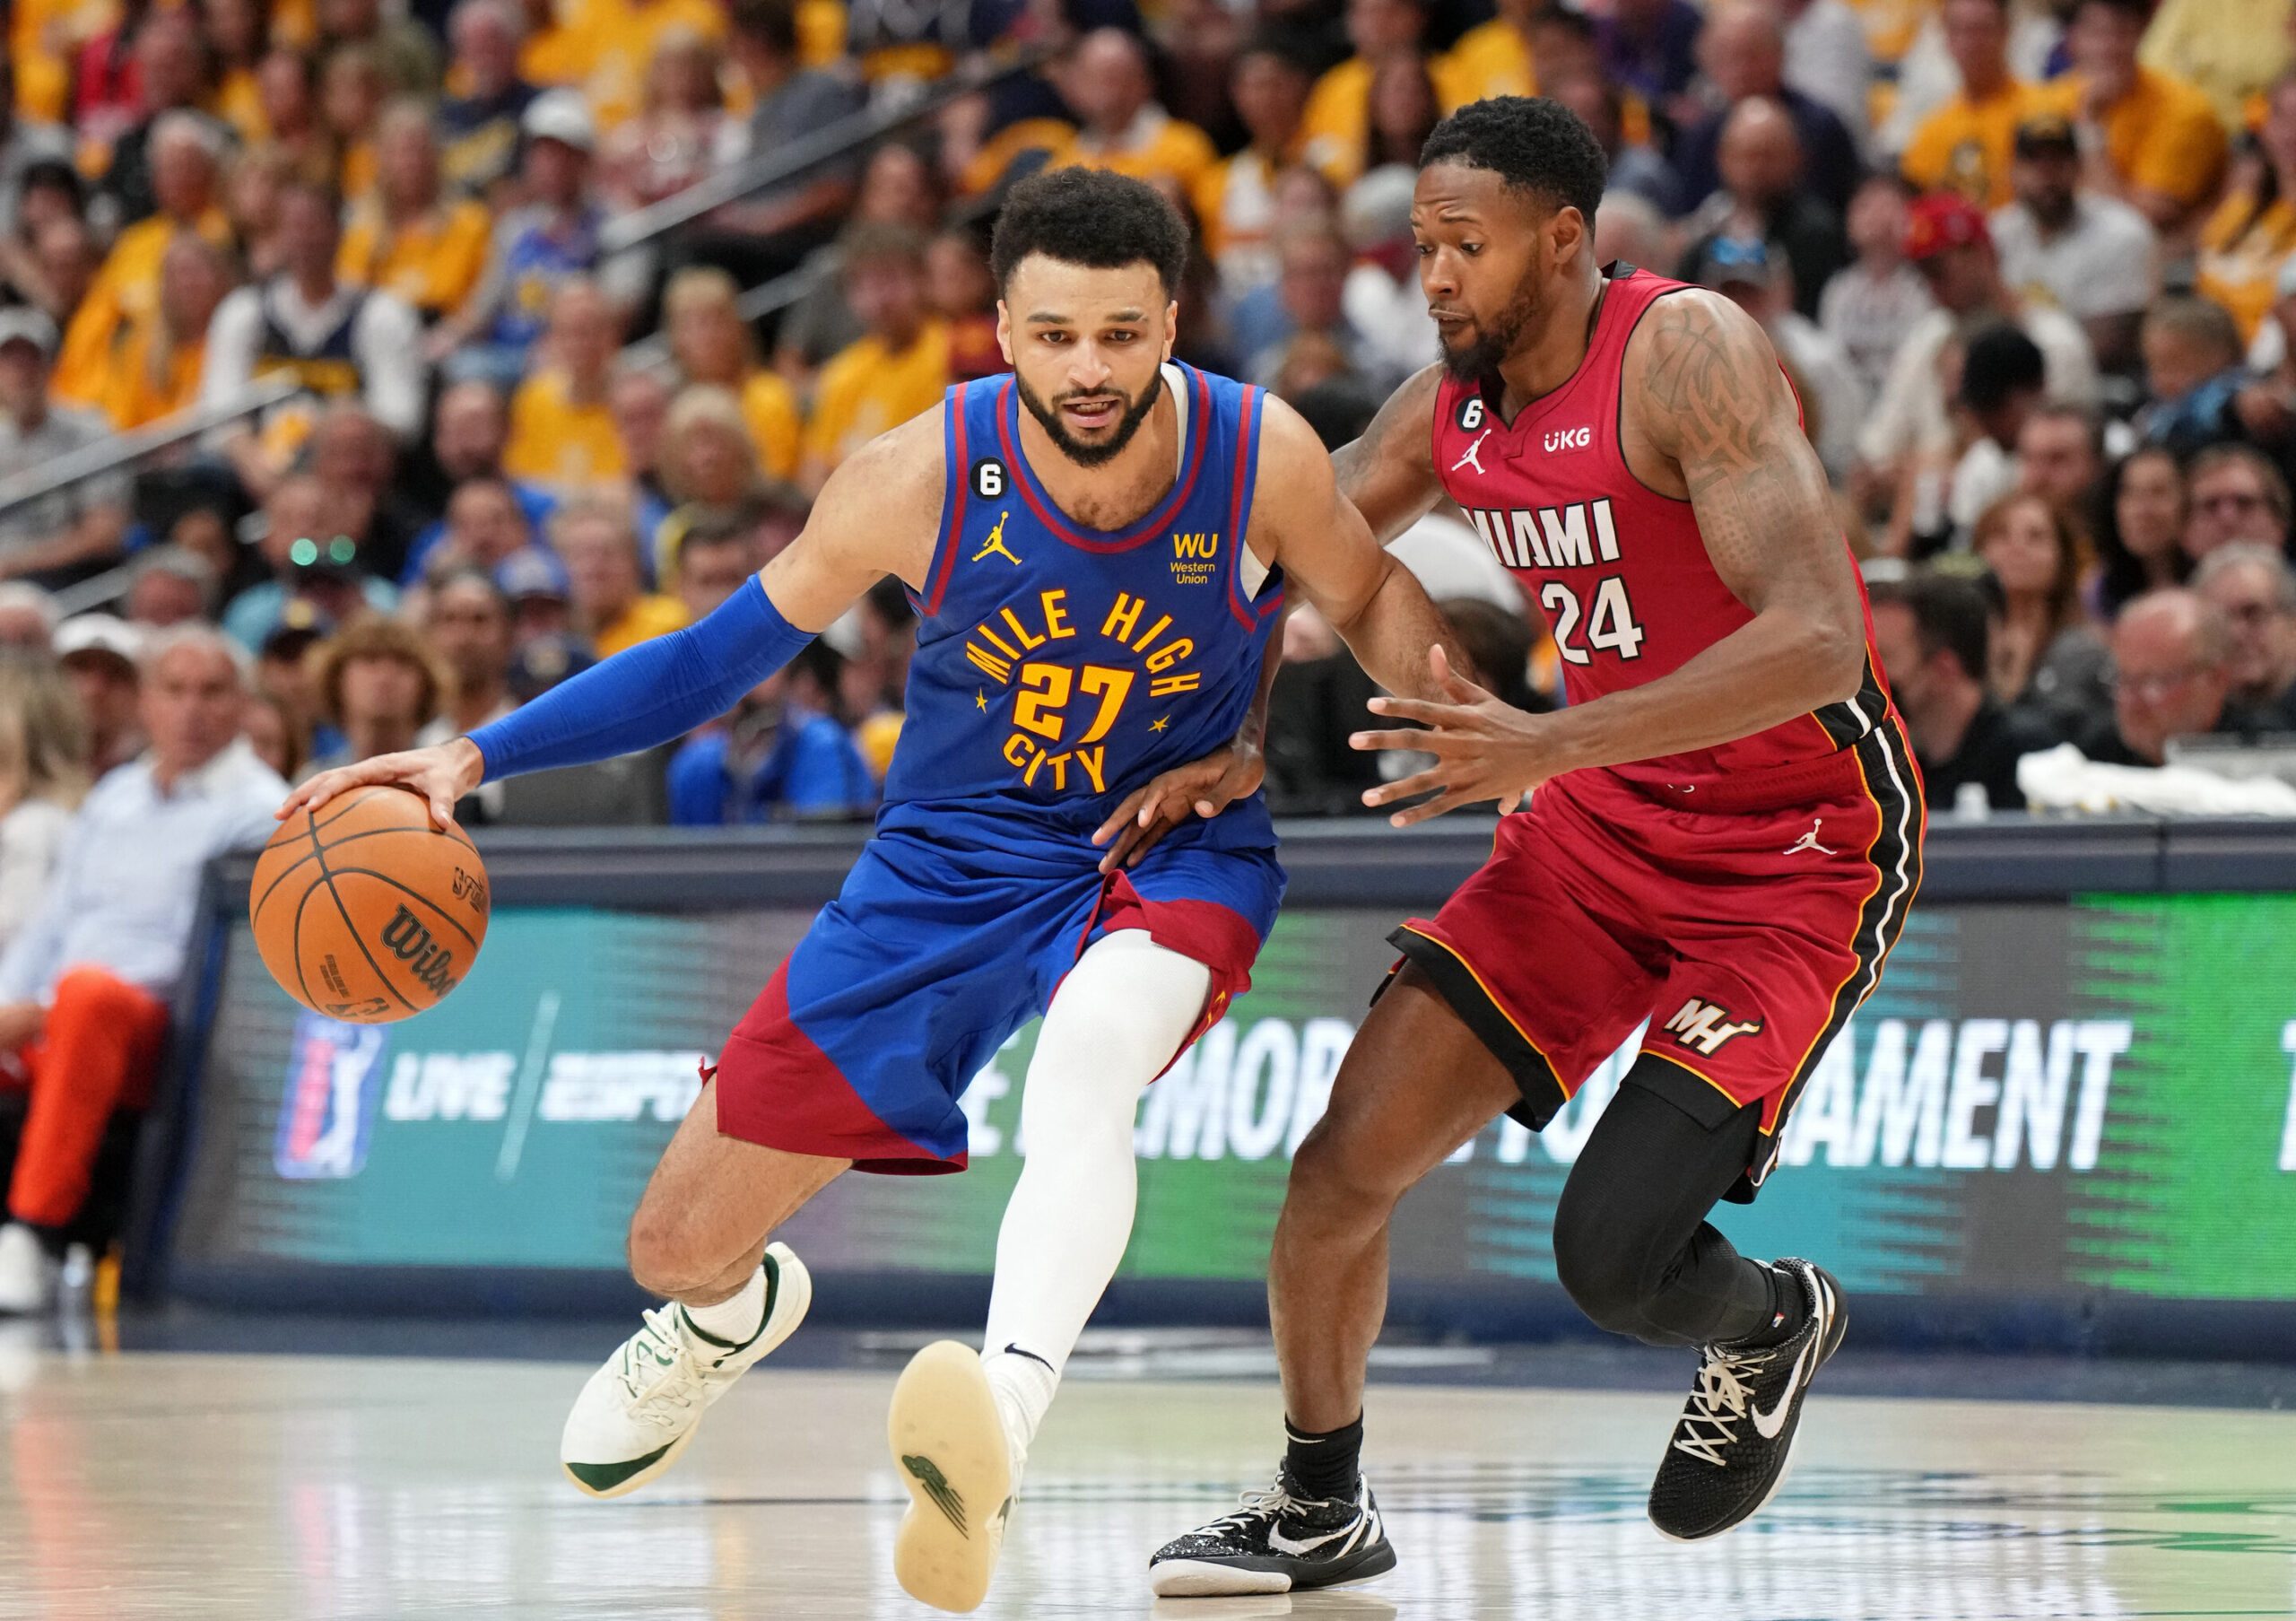 5 takeaways from Game 1 of the NBA Finals